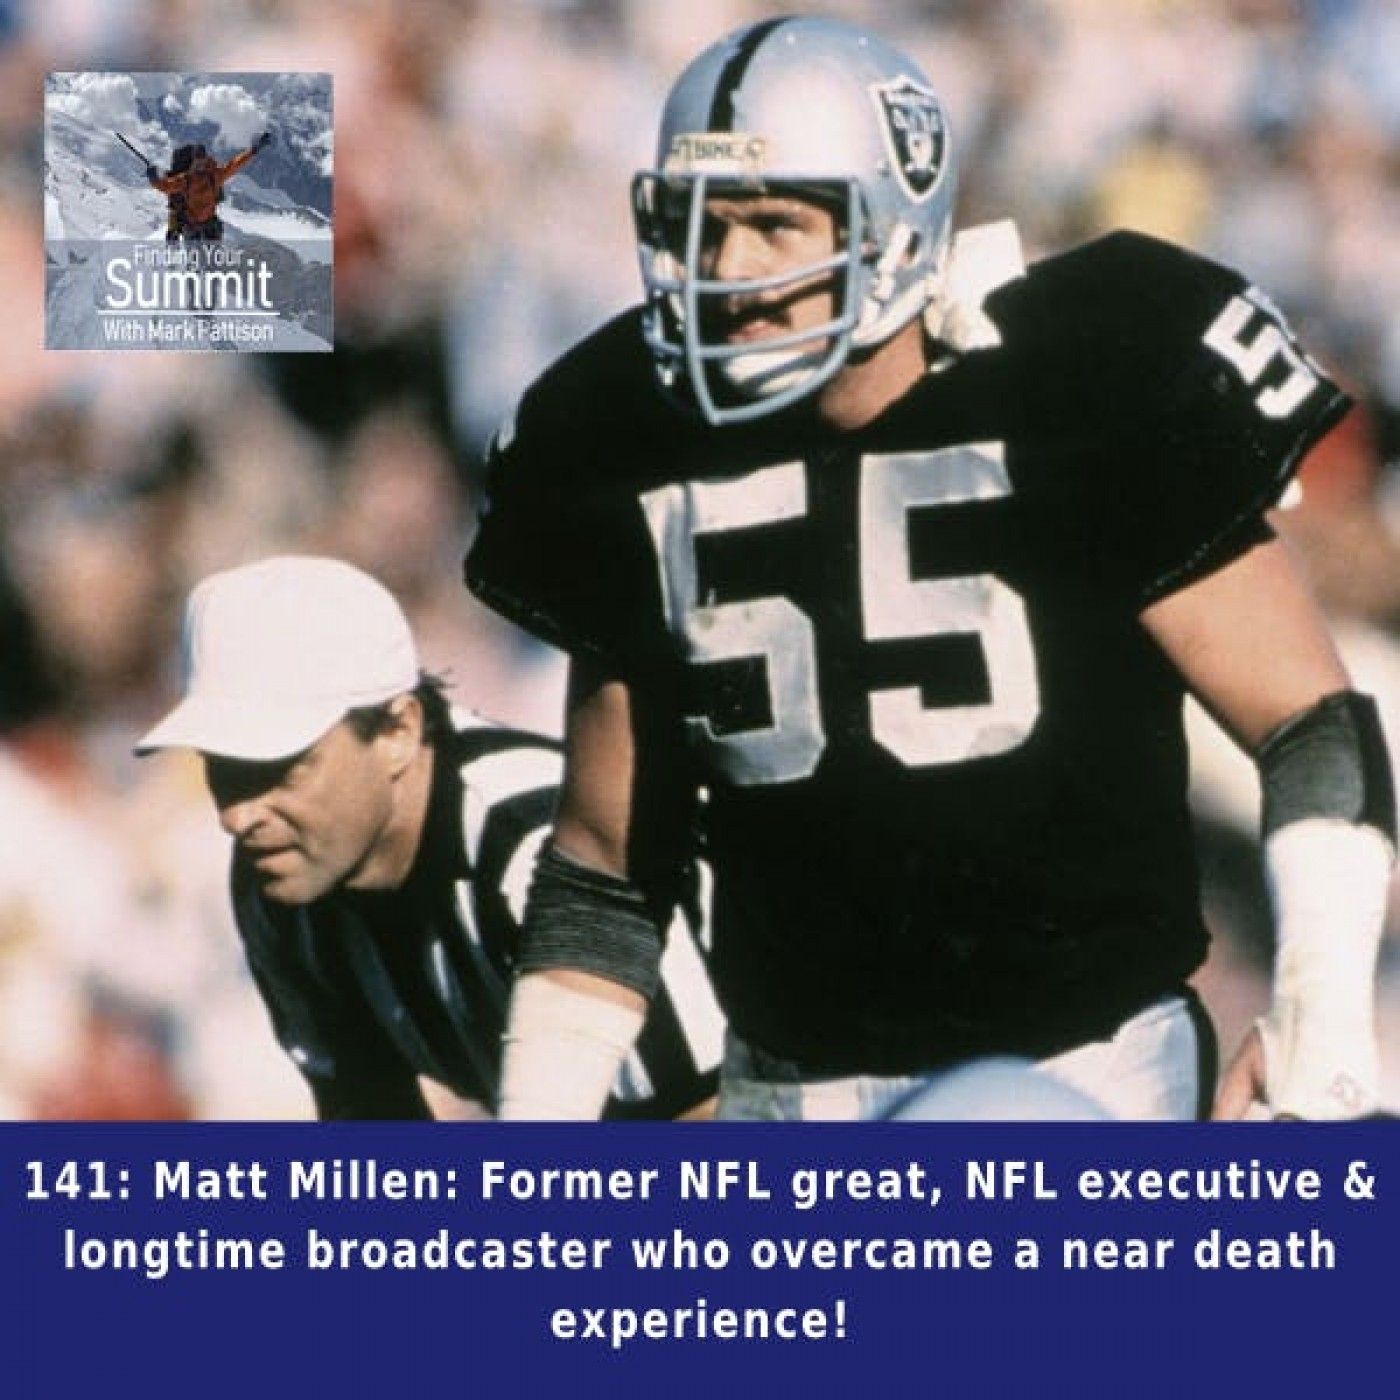 Matt Millen: Former NFL great, NFL executive & longtime broadcaster who overcame a near death experience!